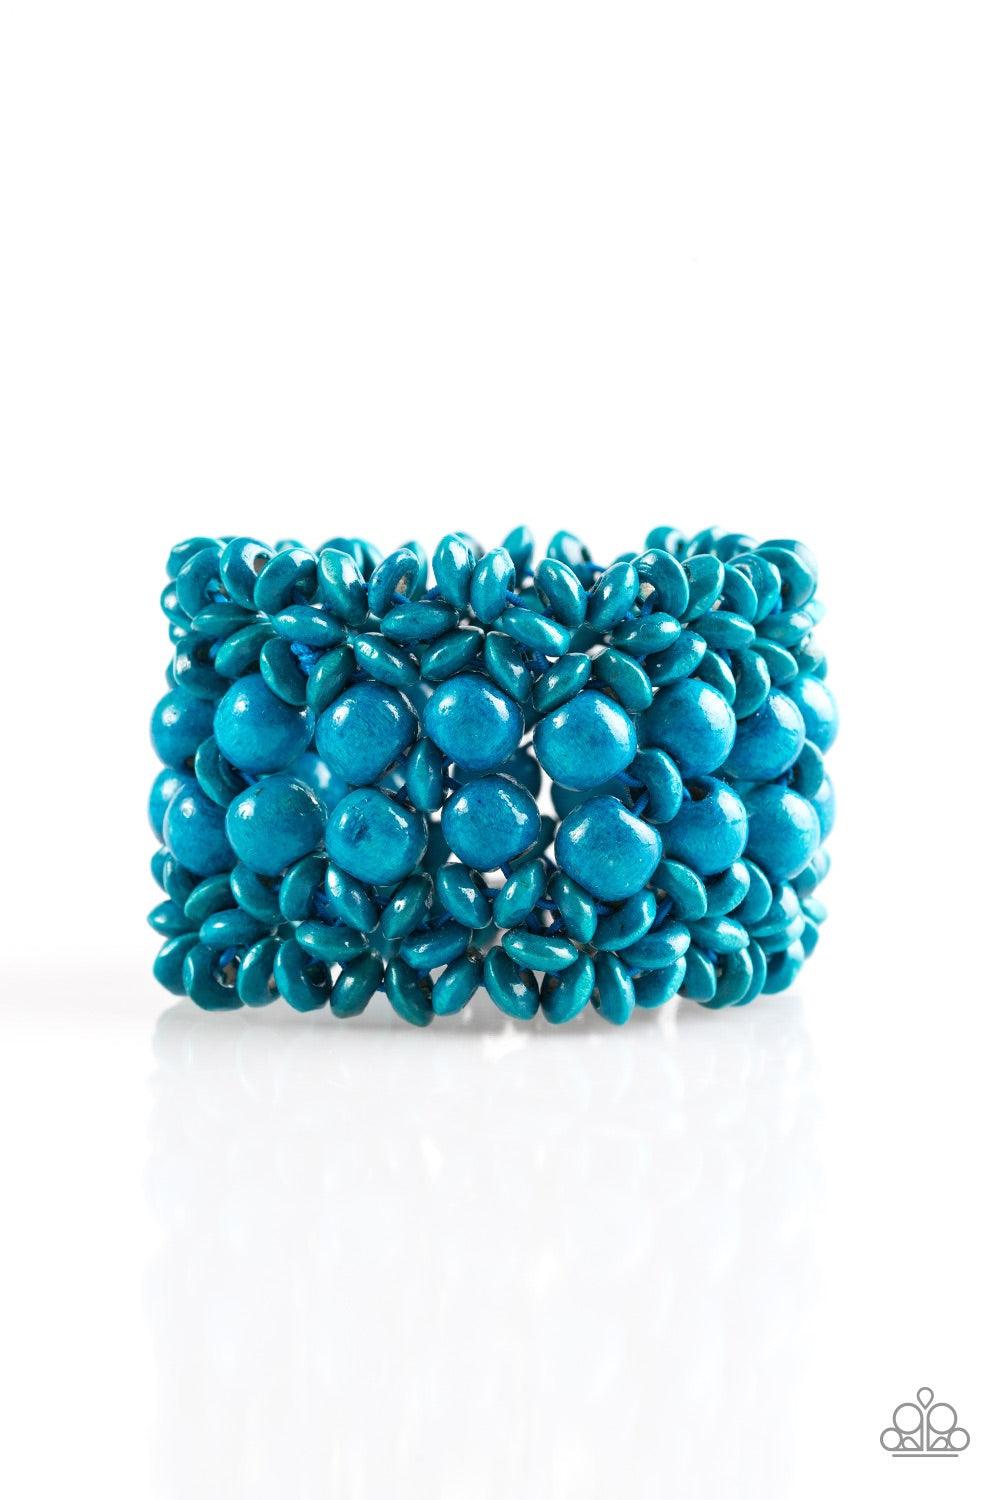 Paparazzi Accessories Tropical Bliss - Blue Blue wooden accents are threaded along elastic stretchy bands, creating an ornate bracelet. Rounded blue wooden beads line the center of the summery pattern for a bold finish. Jewelry